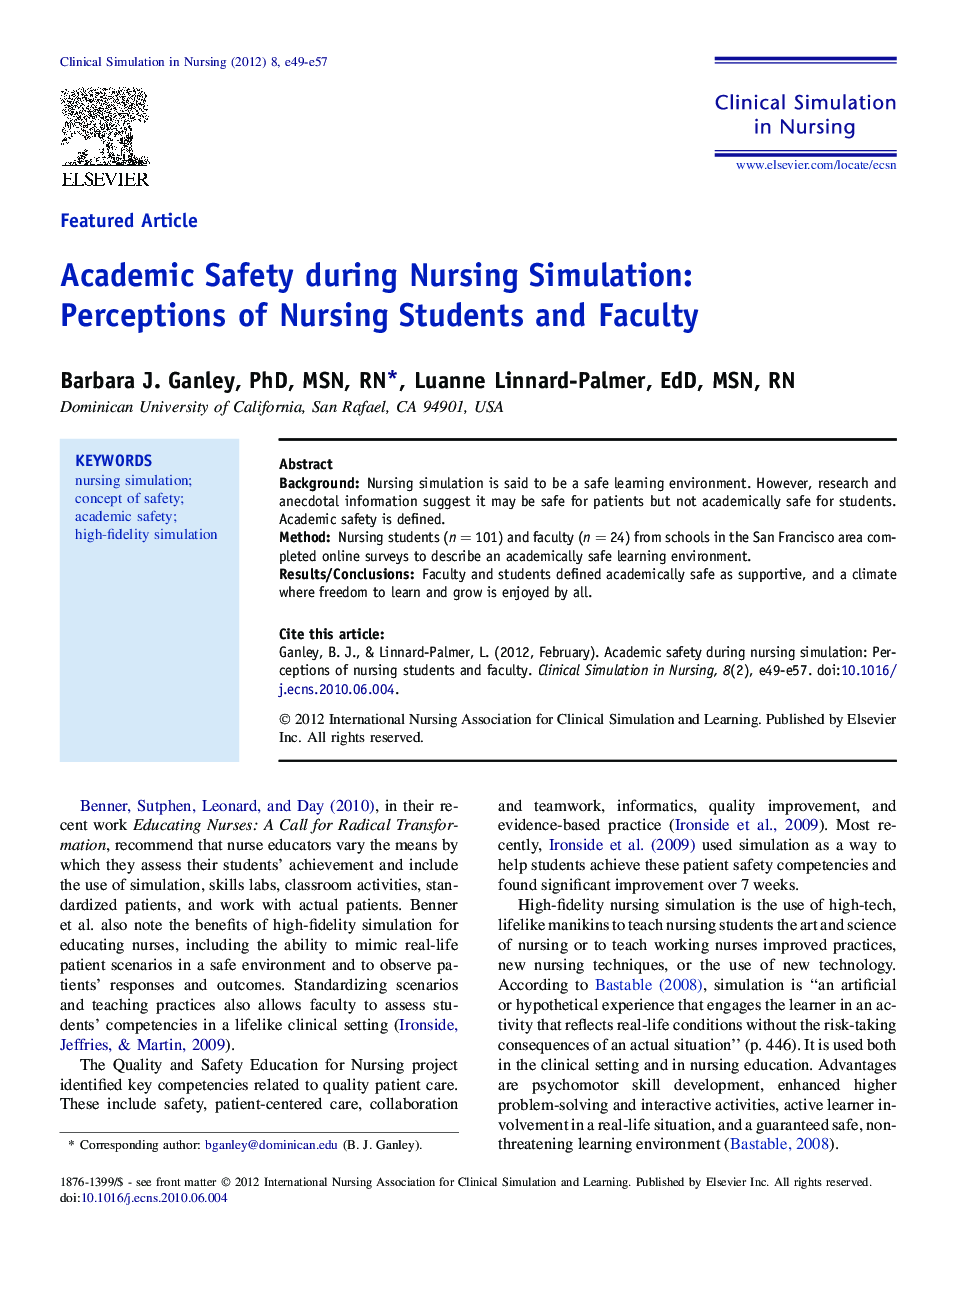 Academic Safety during Nursing Simulation: Perceptions of Nursing Students and Faculty